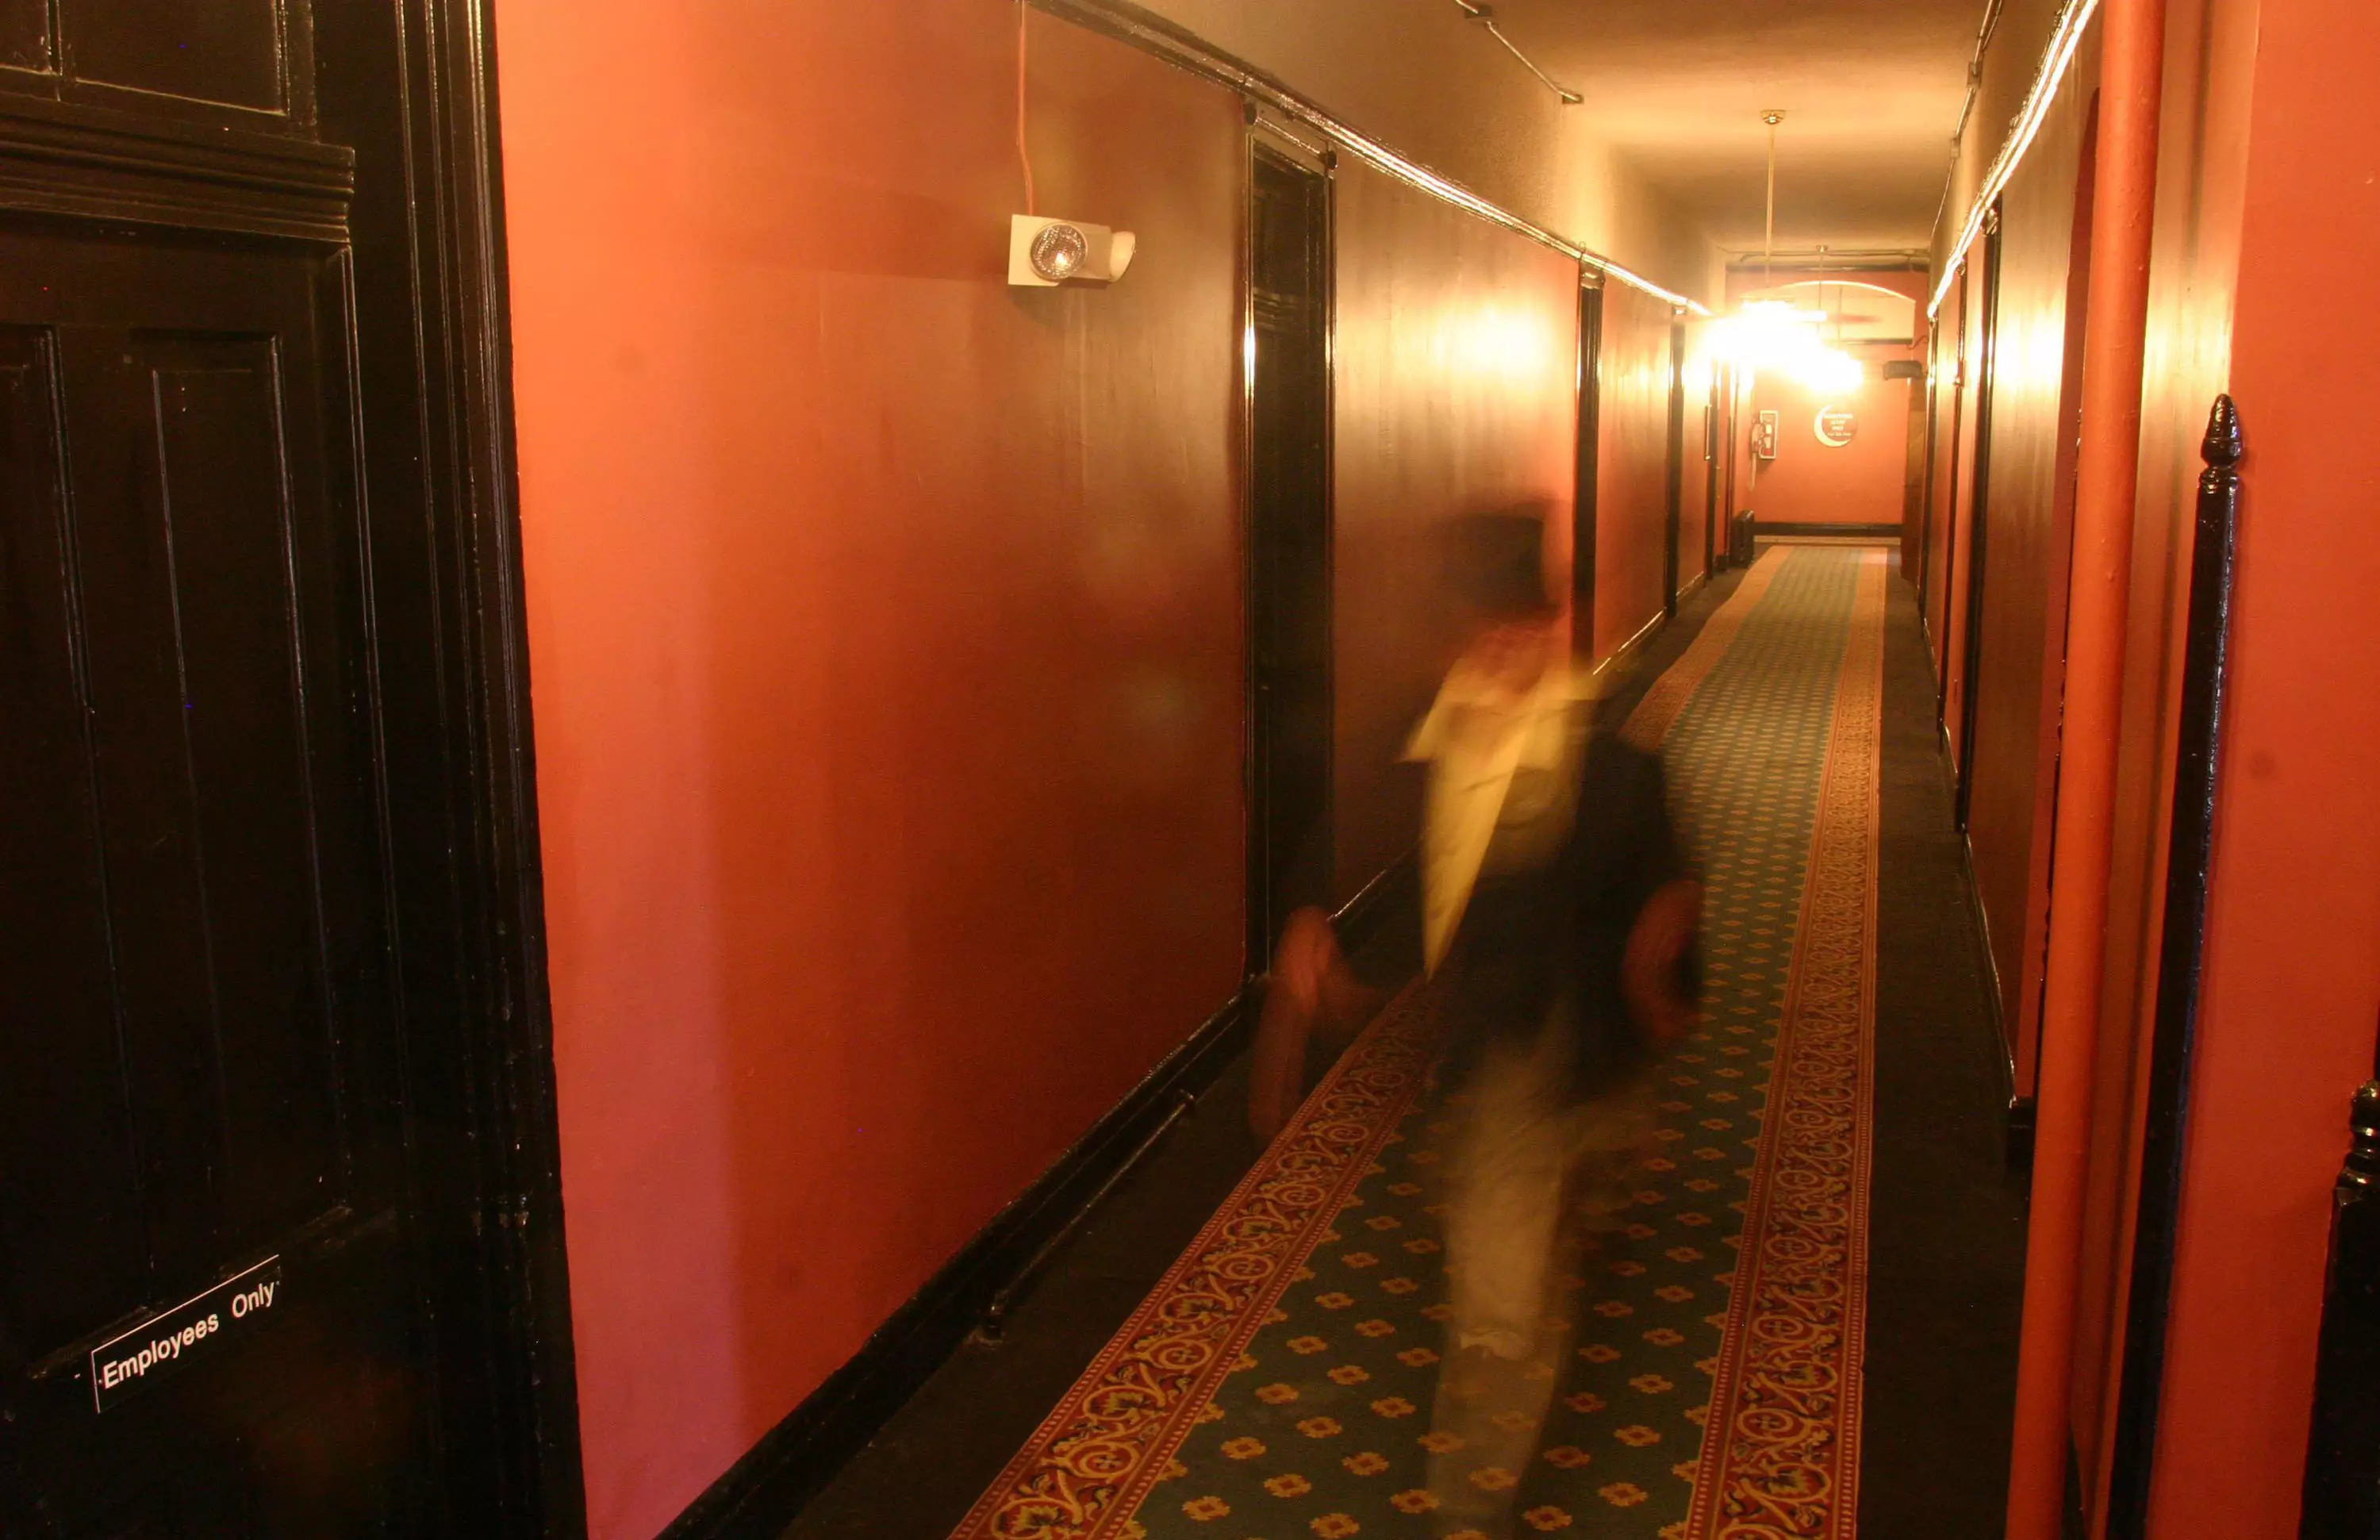 A ghoulish figure treads the hallways (actually just a dude in a top hat shot with a slow shutter speed).